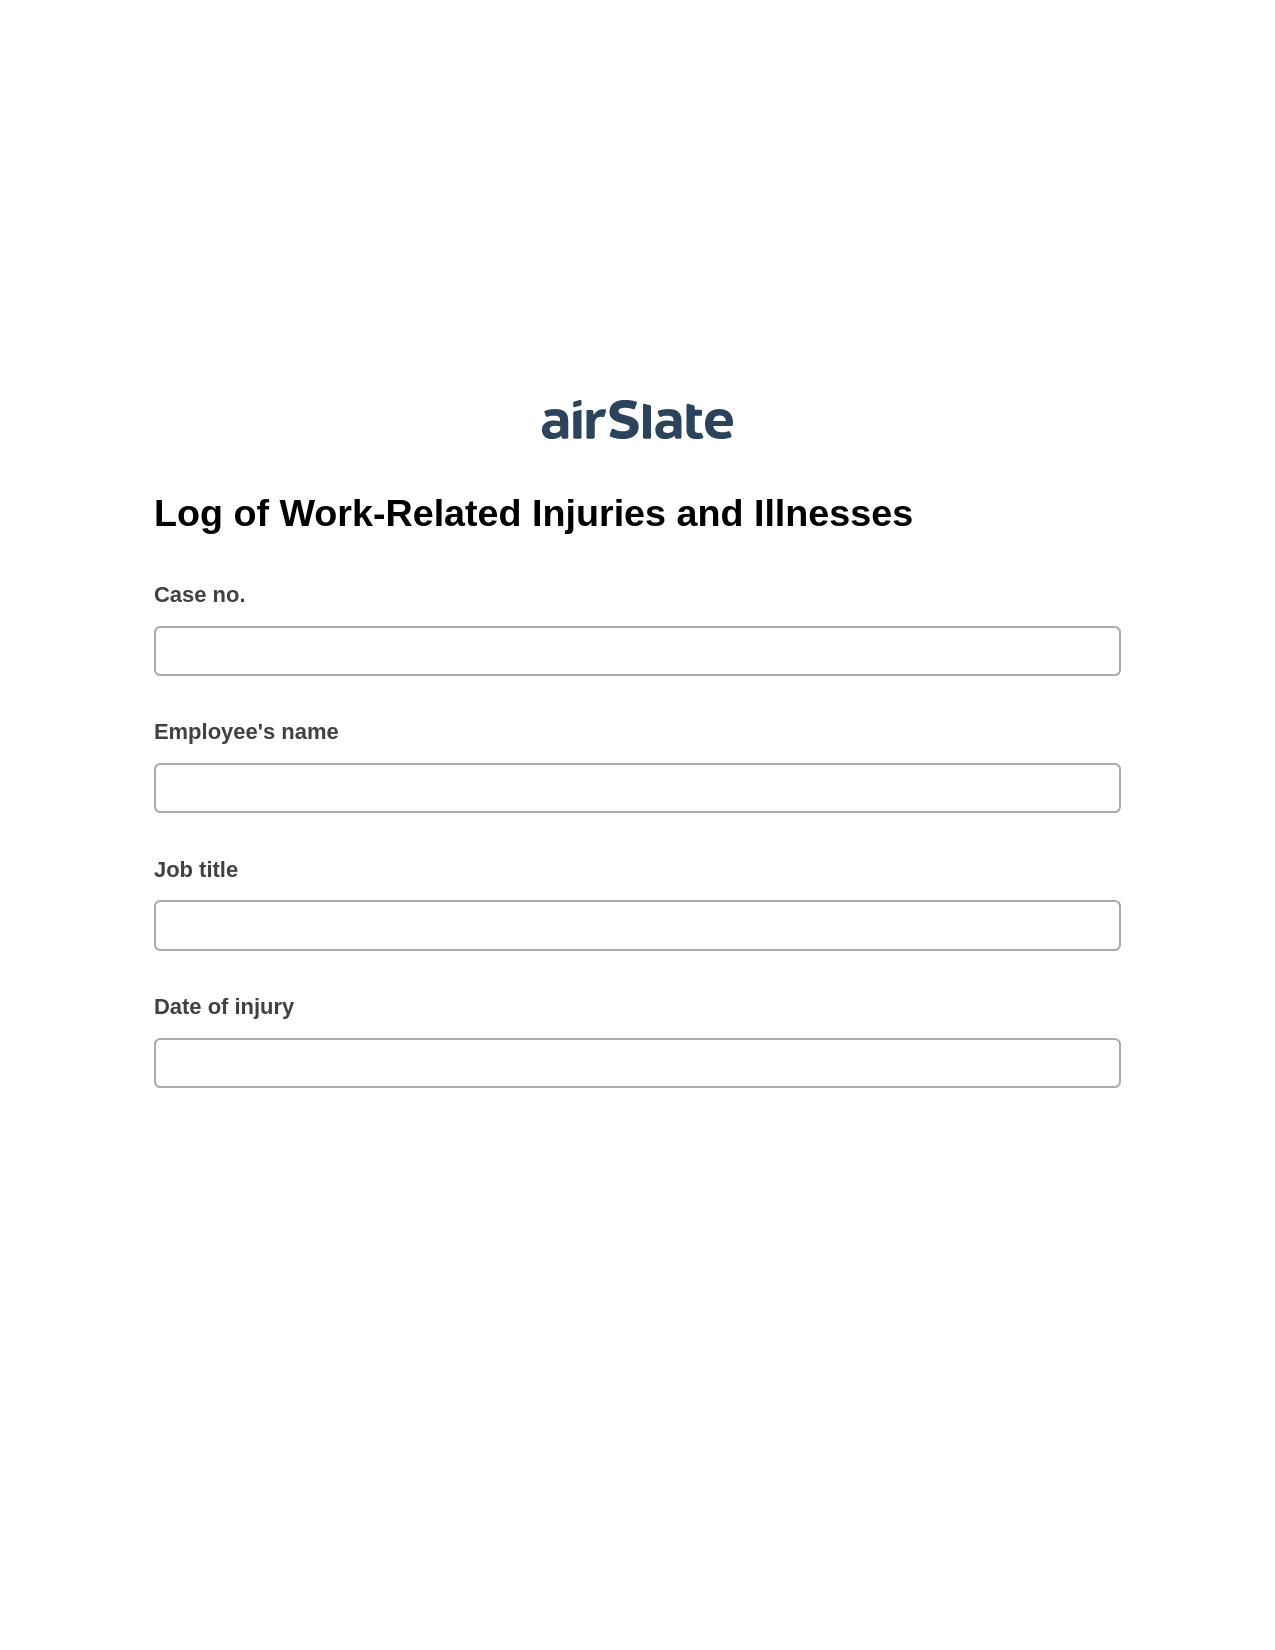 Log of Work-Related Injuries and Illnesses Pre-fill from CSV File Dropdown Options Bot, Invoke Salesforce Process Bot, Export to Salesforce Bot